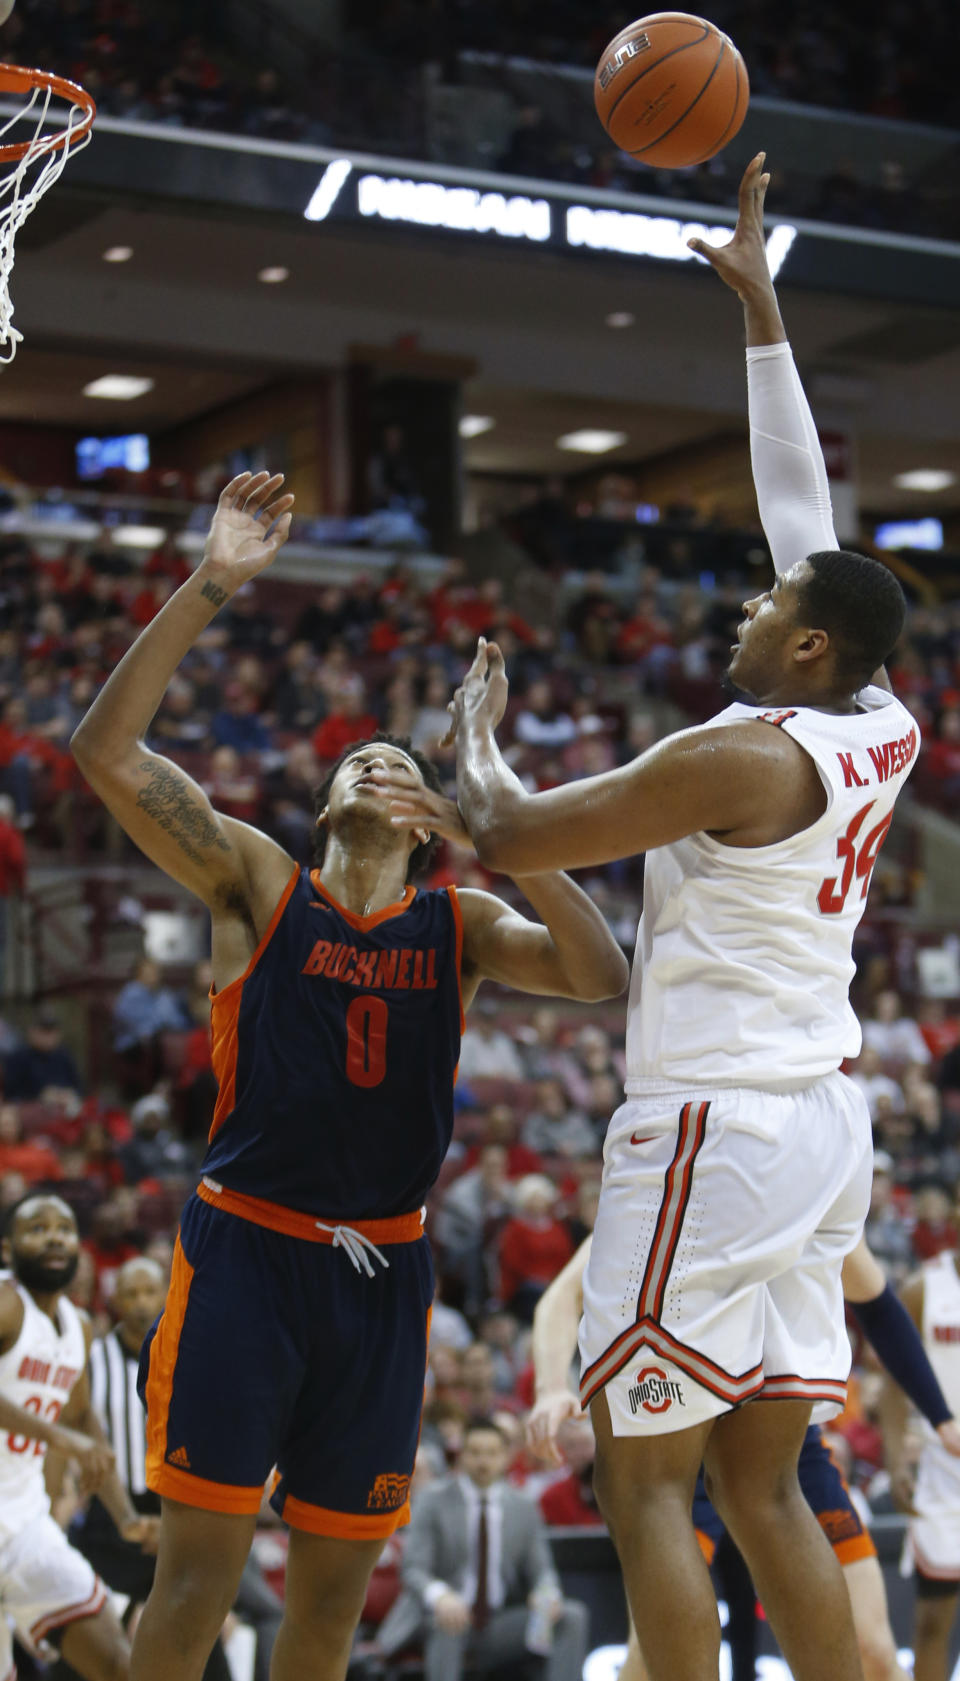 Ohio State's Kaleb Wesson, right, shoots over Bucknell's Paul Newman during the second half of an NCAA college basketball game Saturday, Dec. 15, 2018, in Columbus, Ohio. Ohio State beat Bucknell 73-71. (AP Photo/Jay LaPrete)